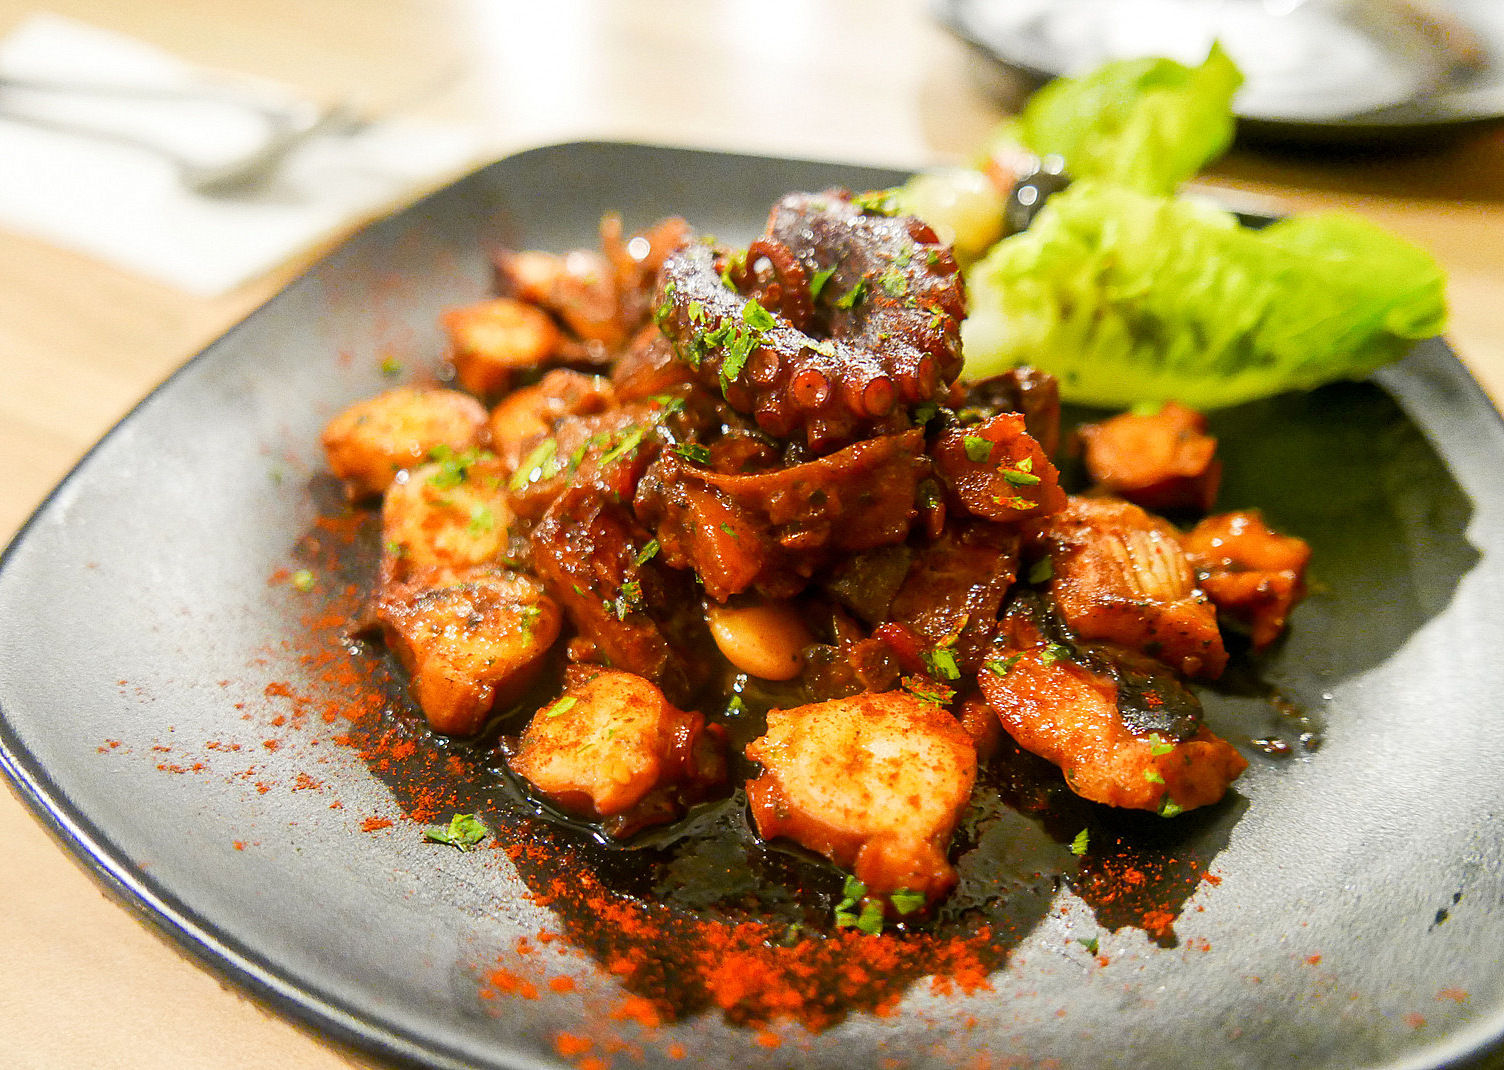 2. Basil Tapas Bar - slow cooked octopus with duck fat potatoes